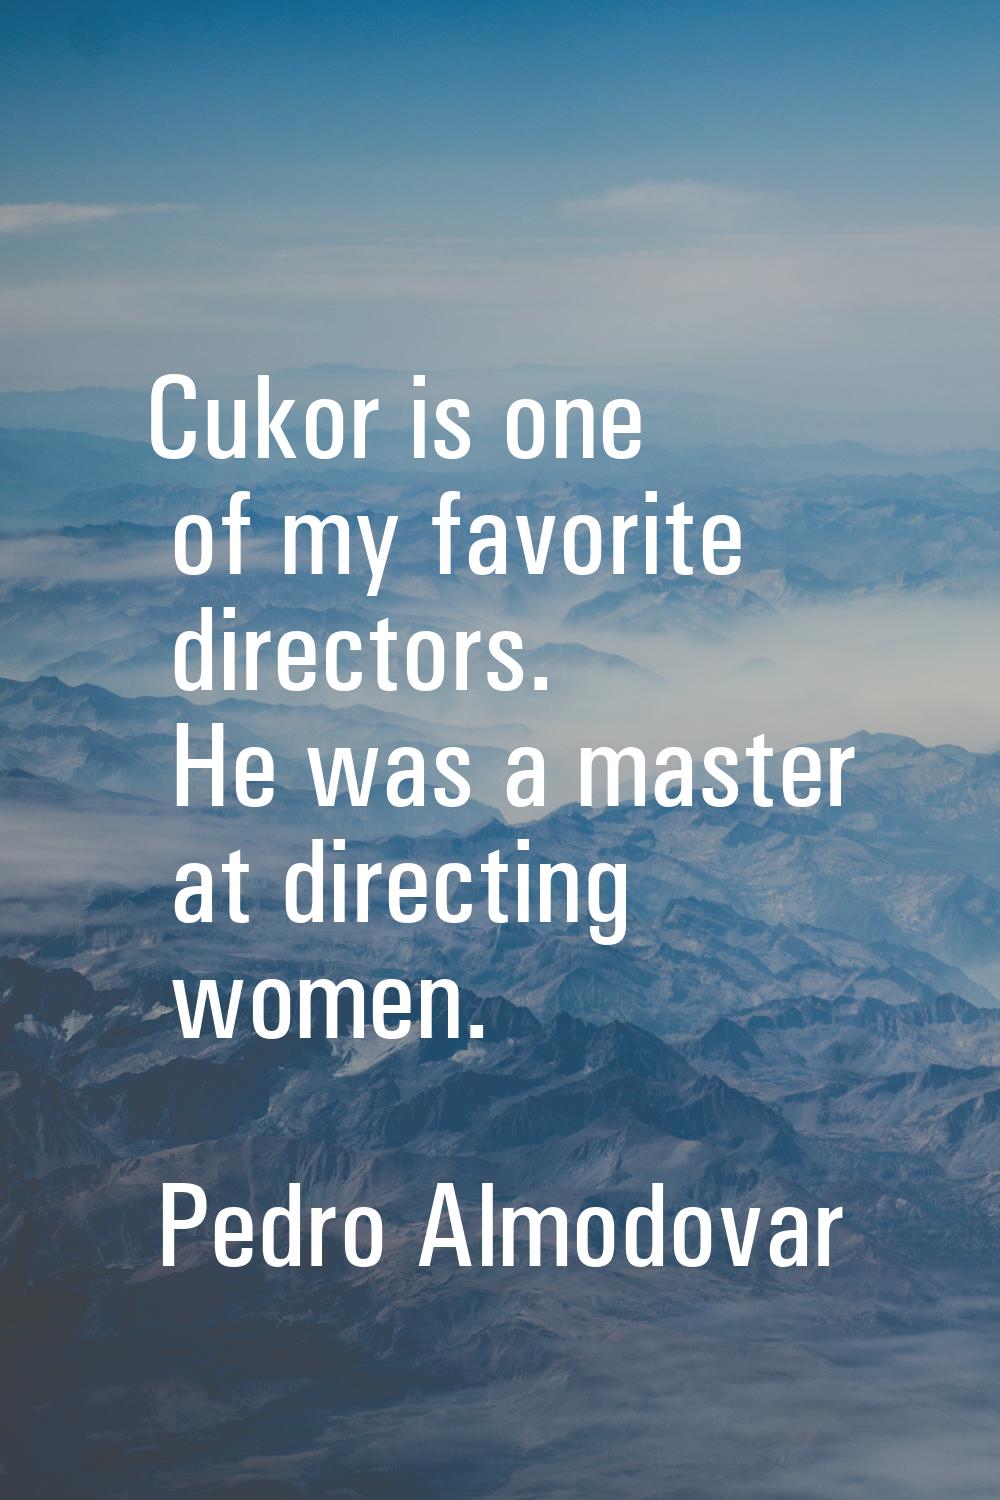 Cukor is one of my favorite directors. He was a master at directing women.